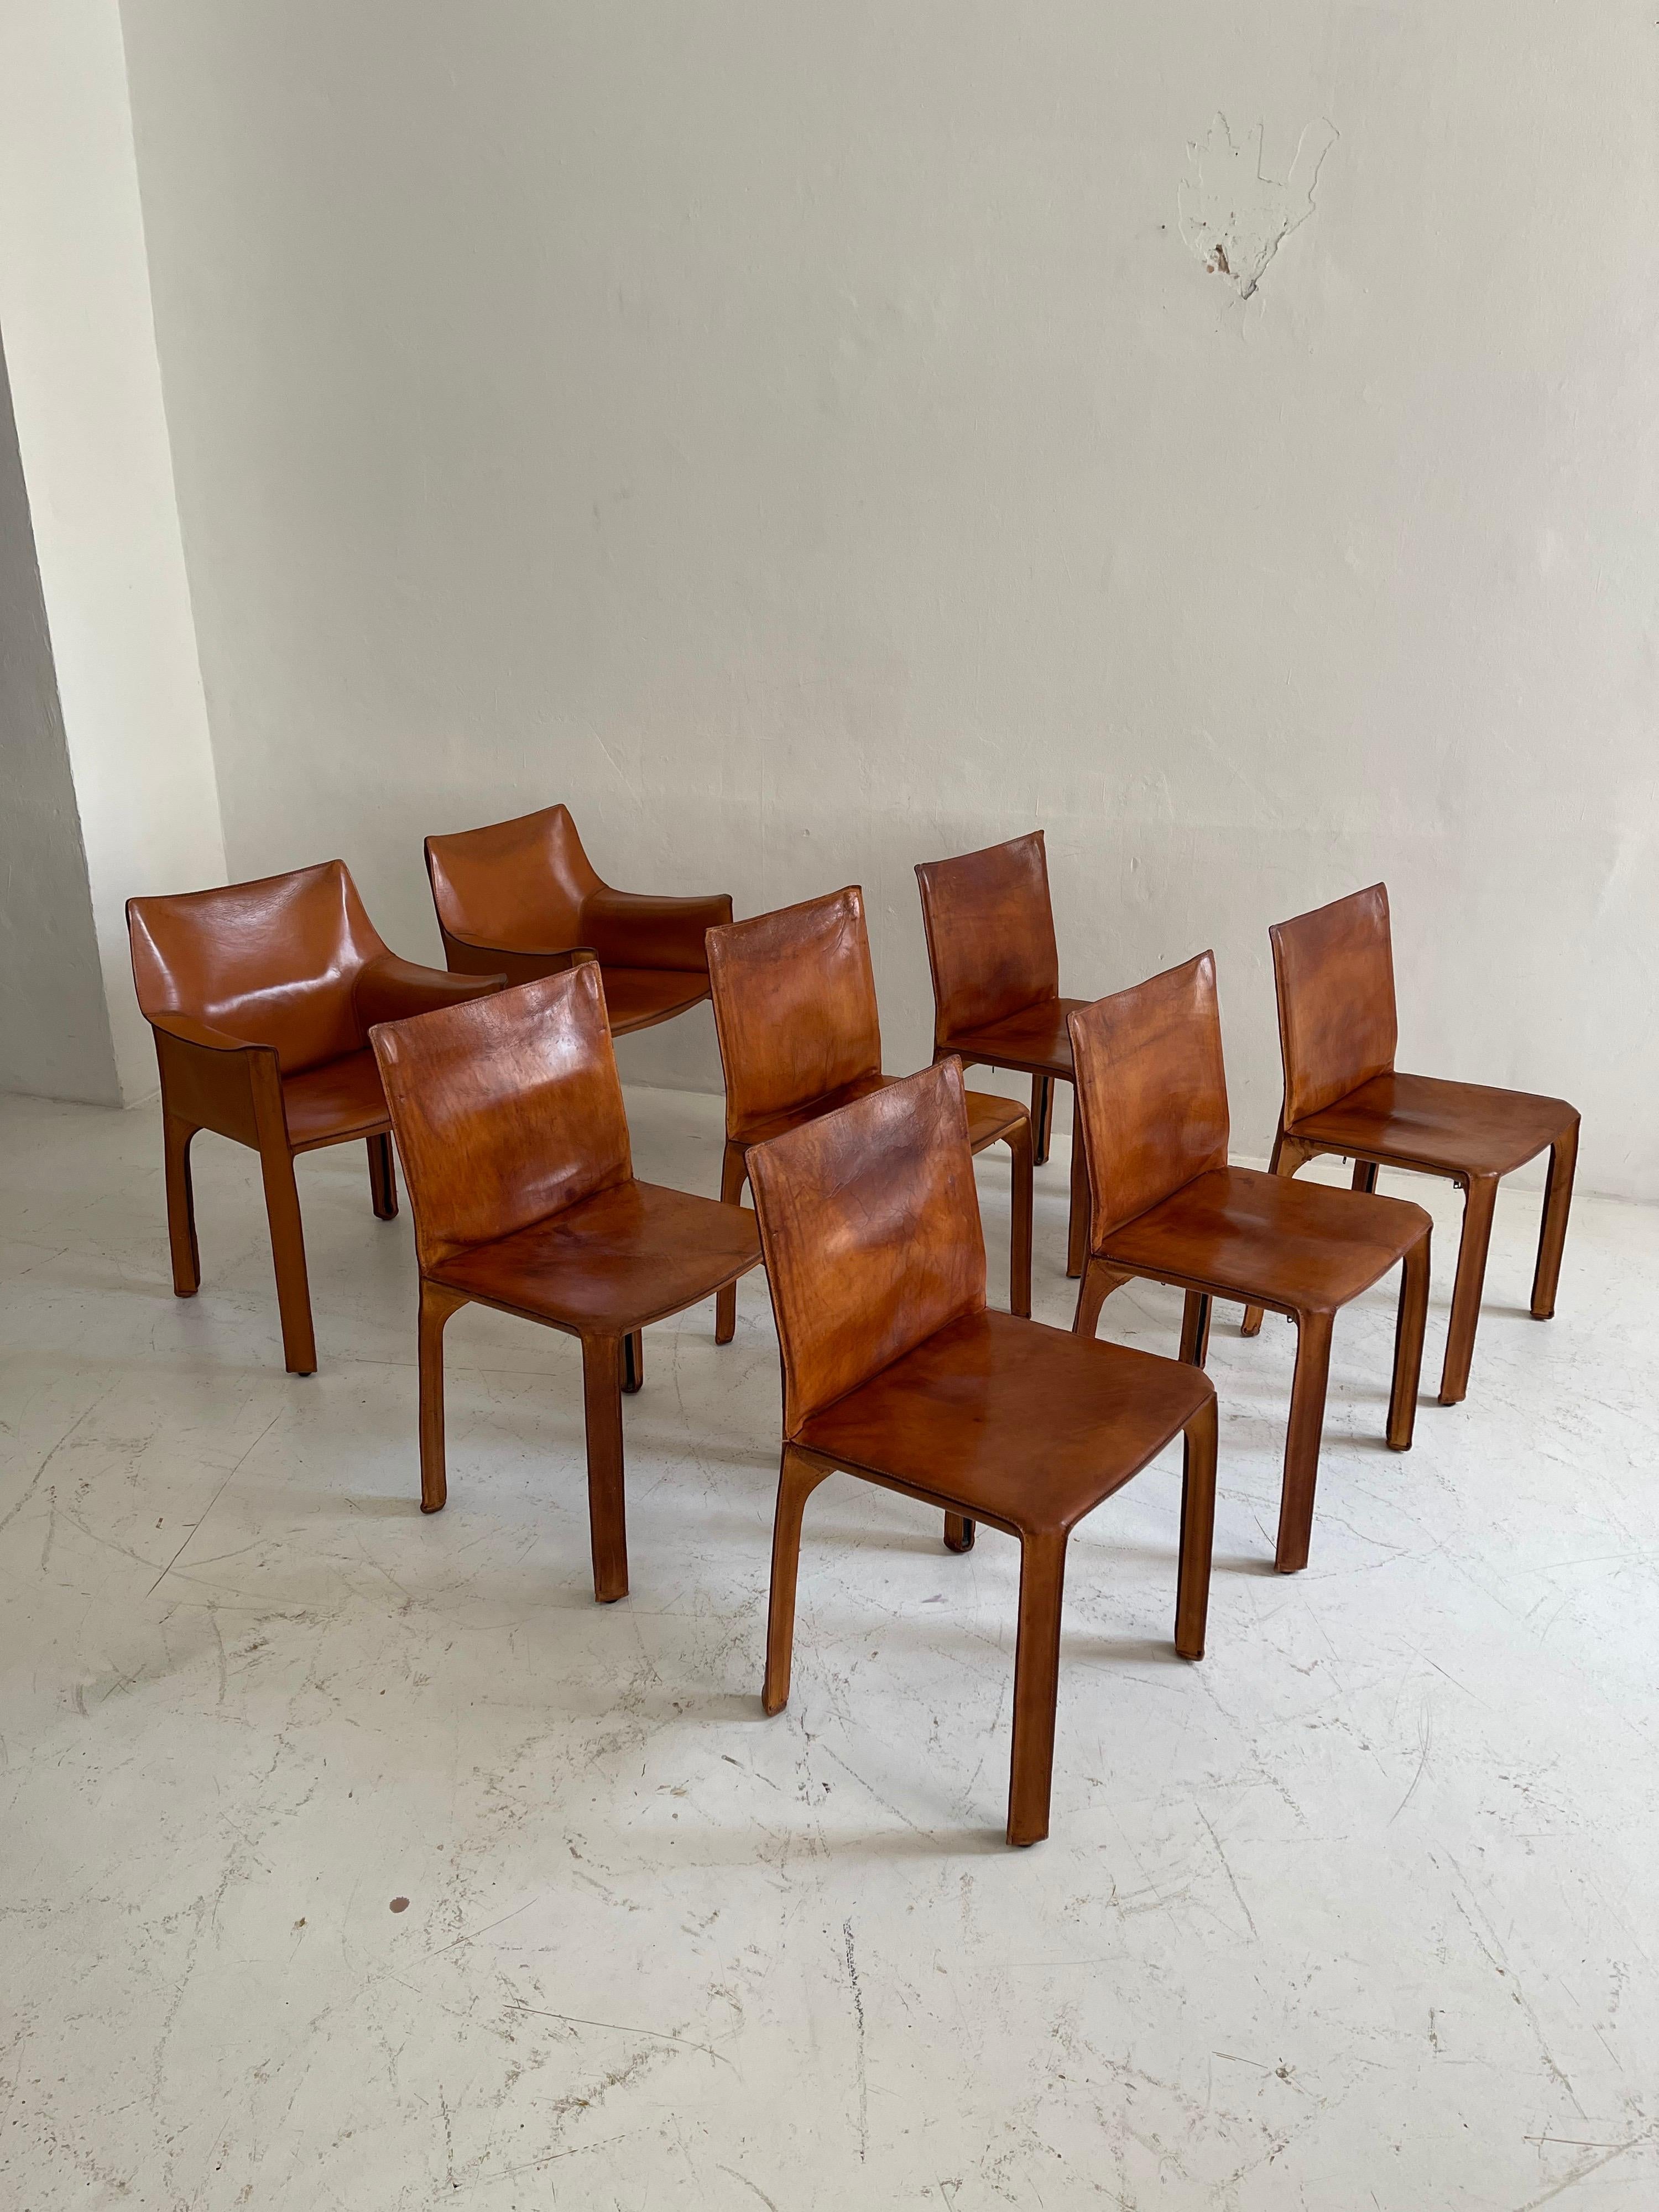 Mario Bellini CAB chairs set of eight Cassina, patinated Cognac leather, 1970s.